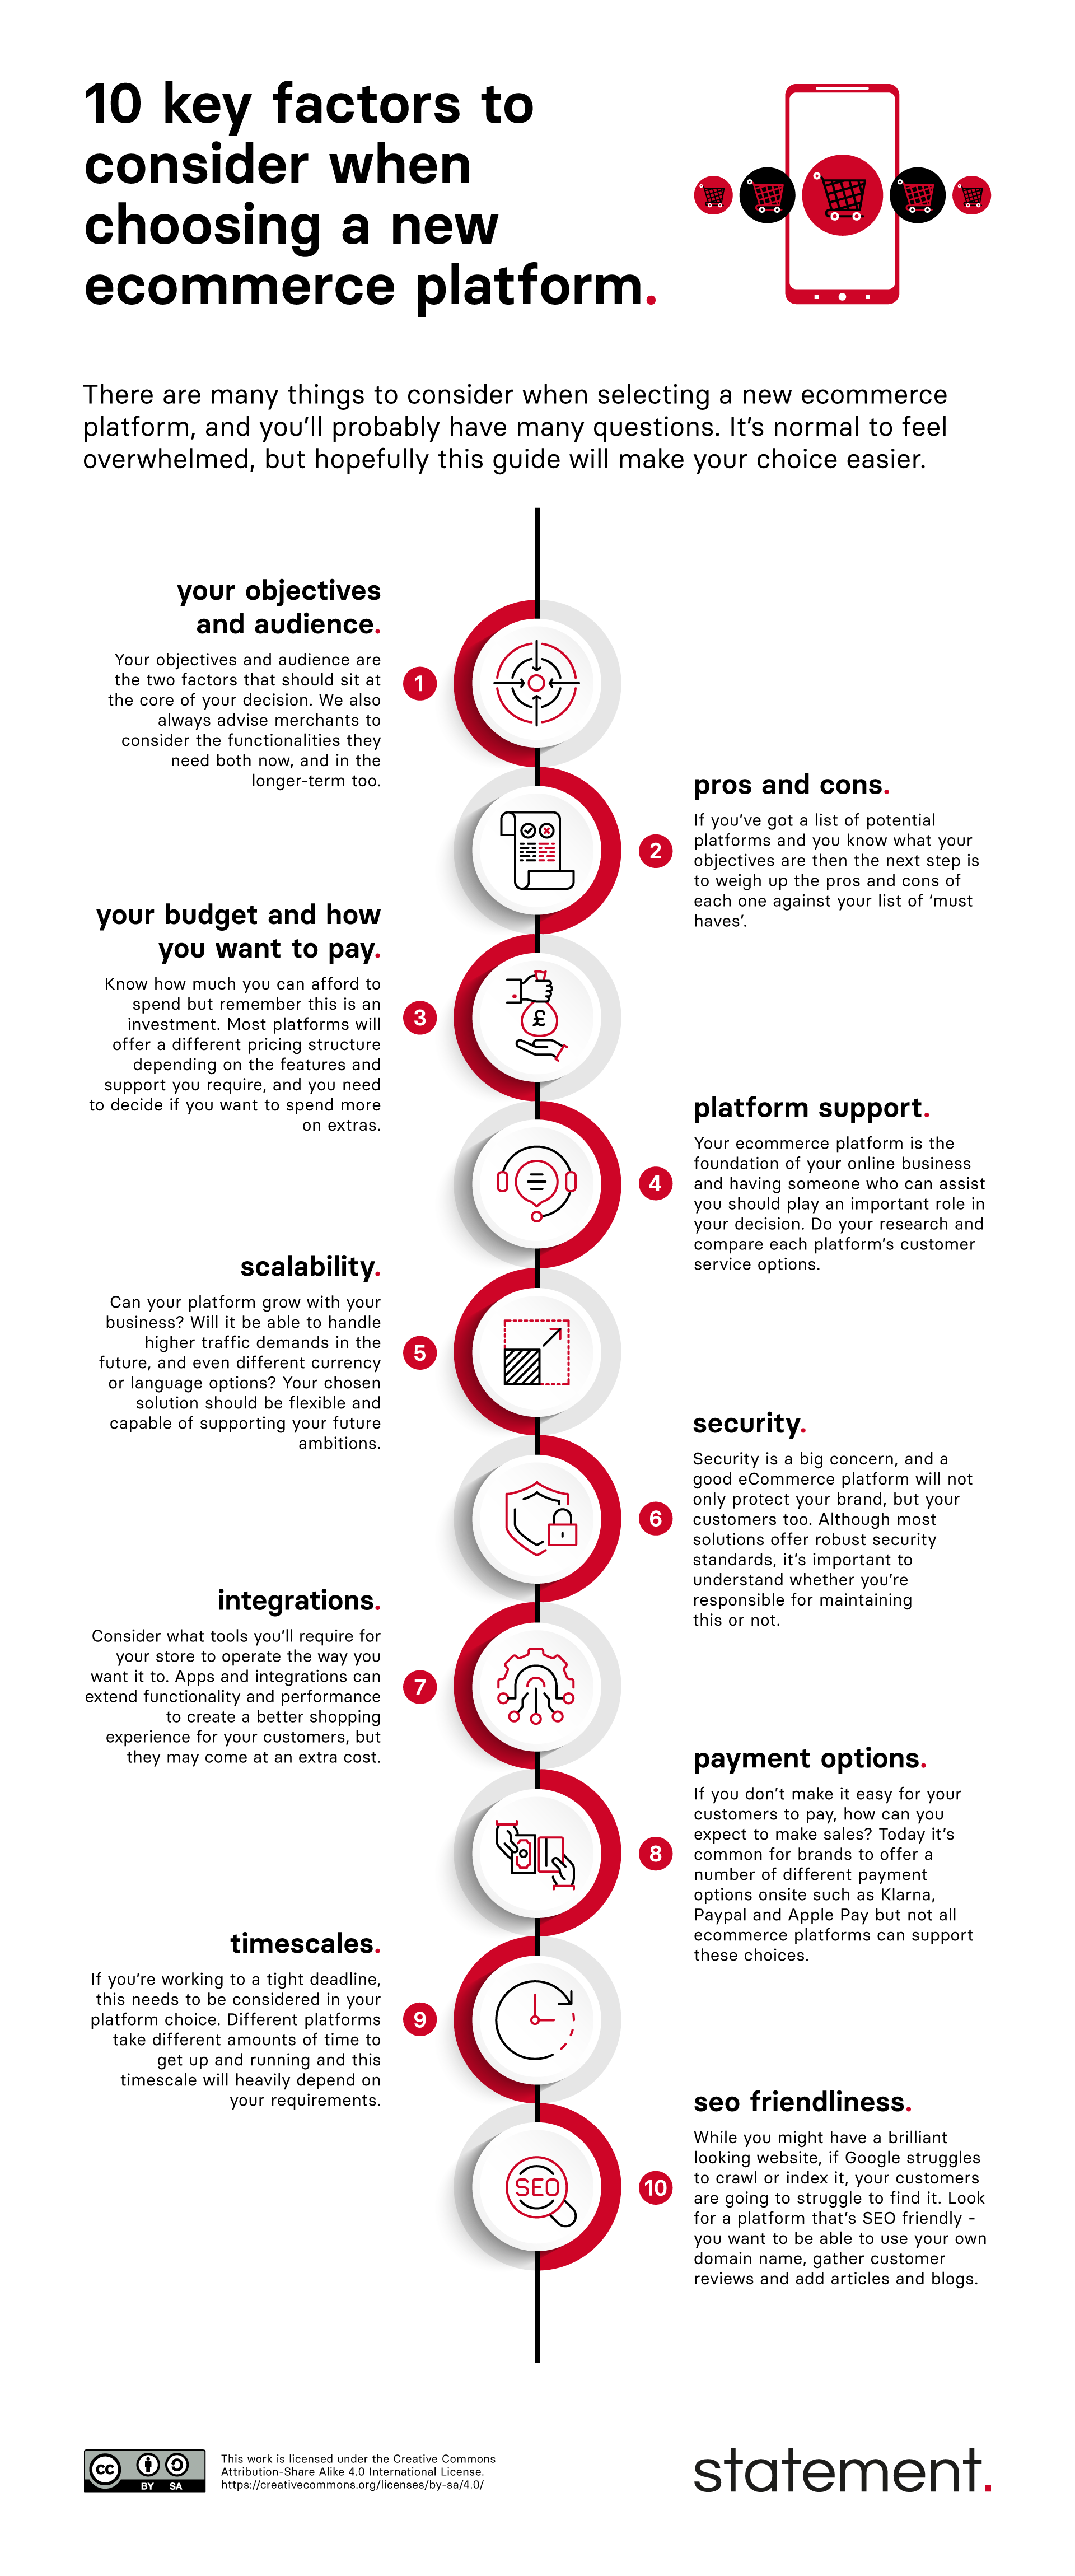 infographic showing 10 key factors to consider when choosing an ecommerce platform